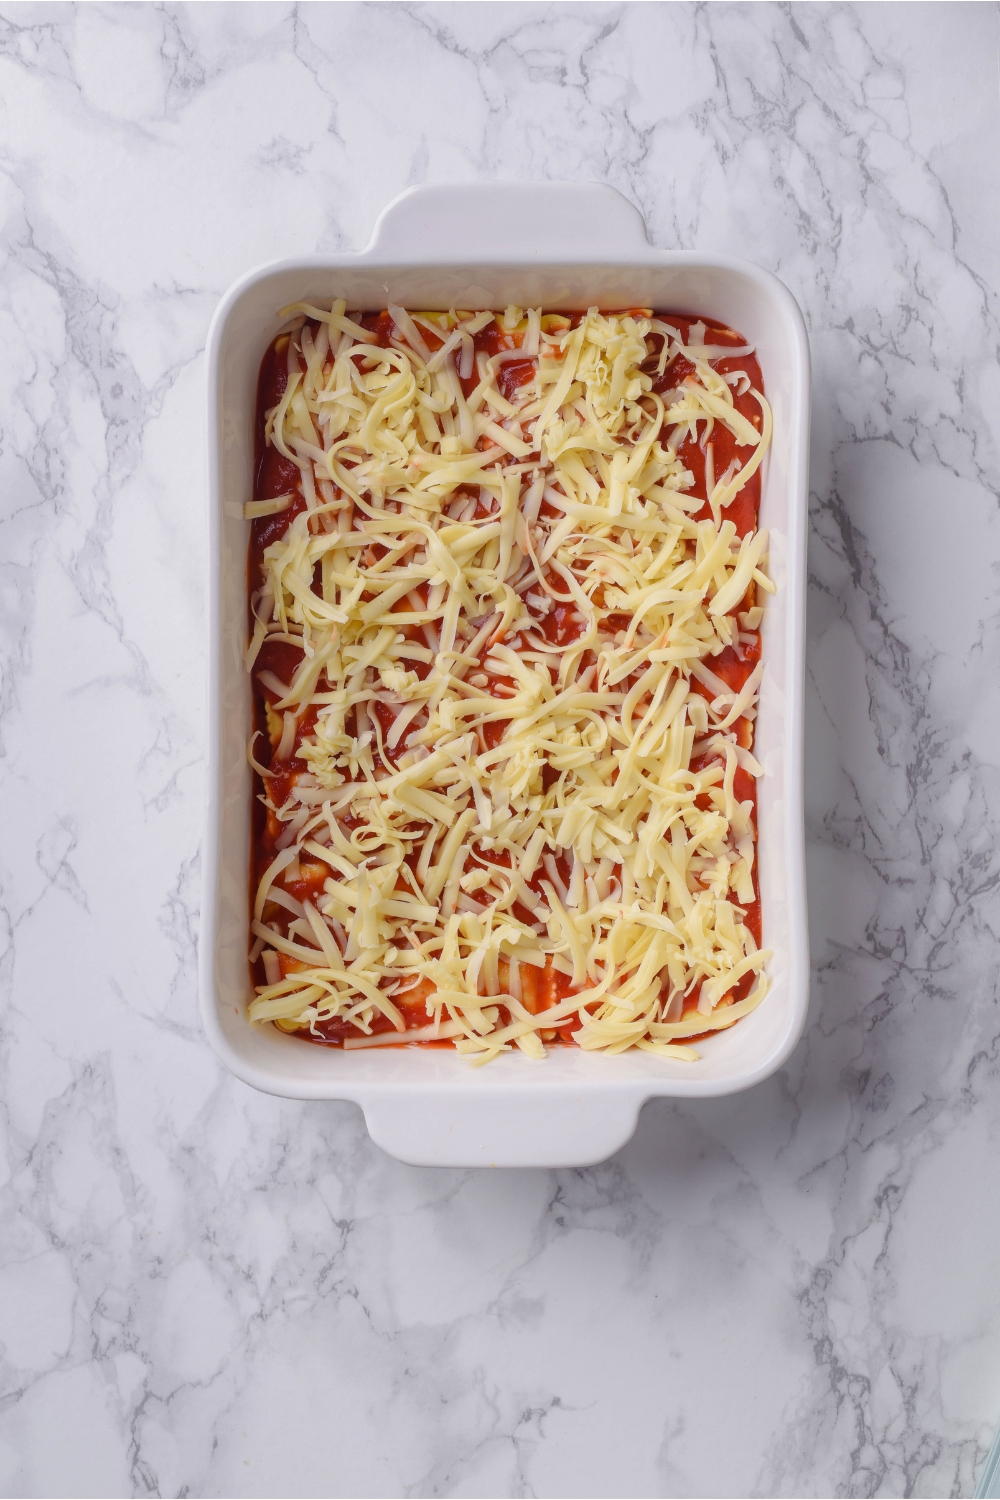 A baking dish filled with unbaked ravioli casserole topped with shredded mozzarella cheese.